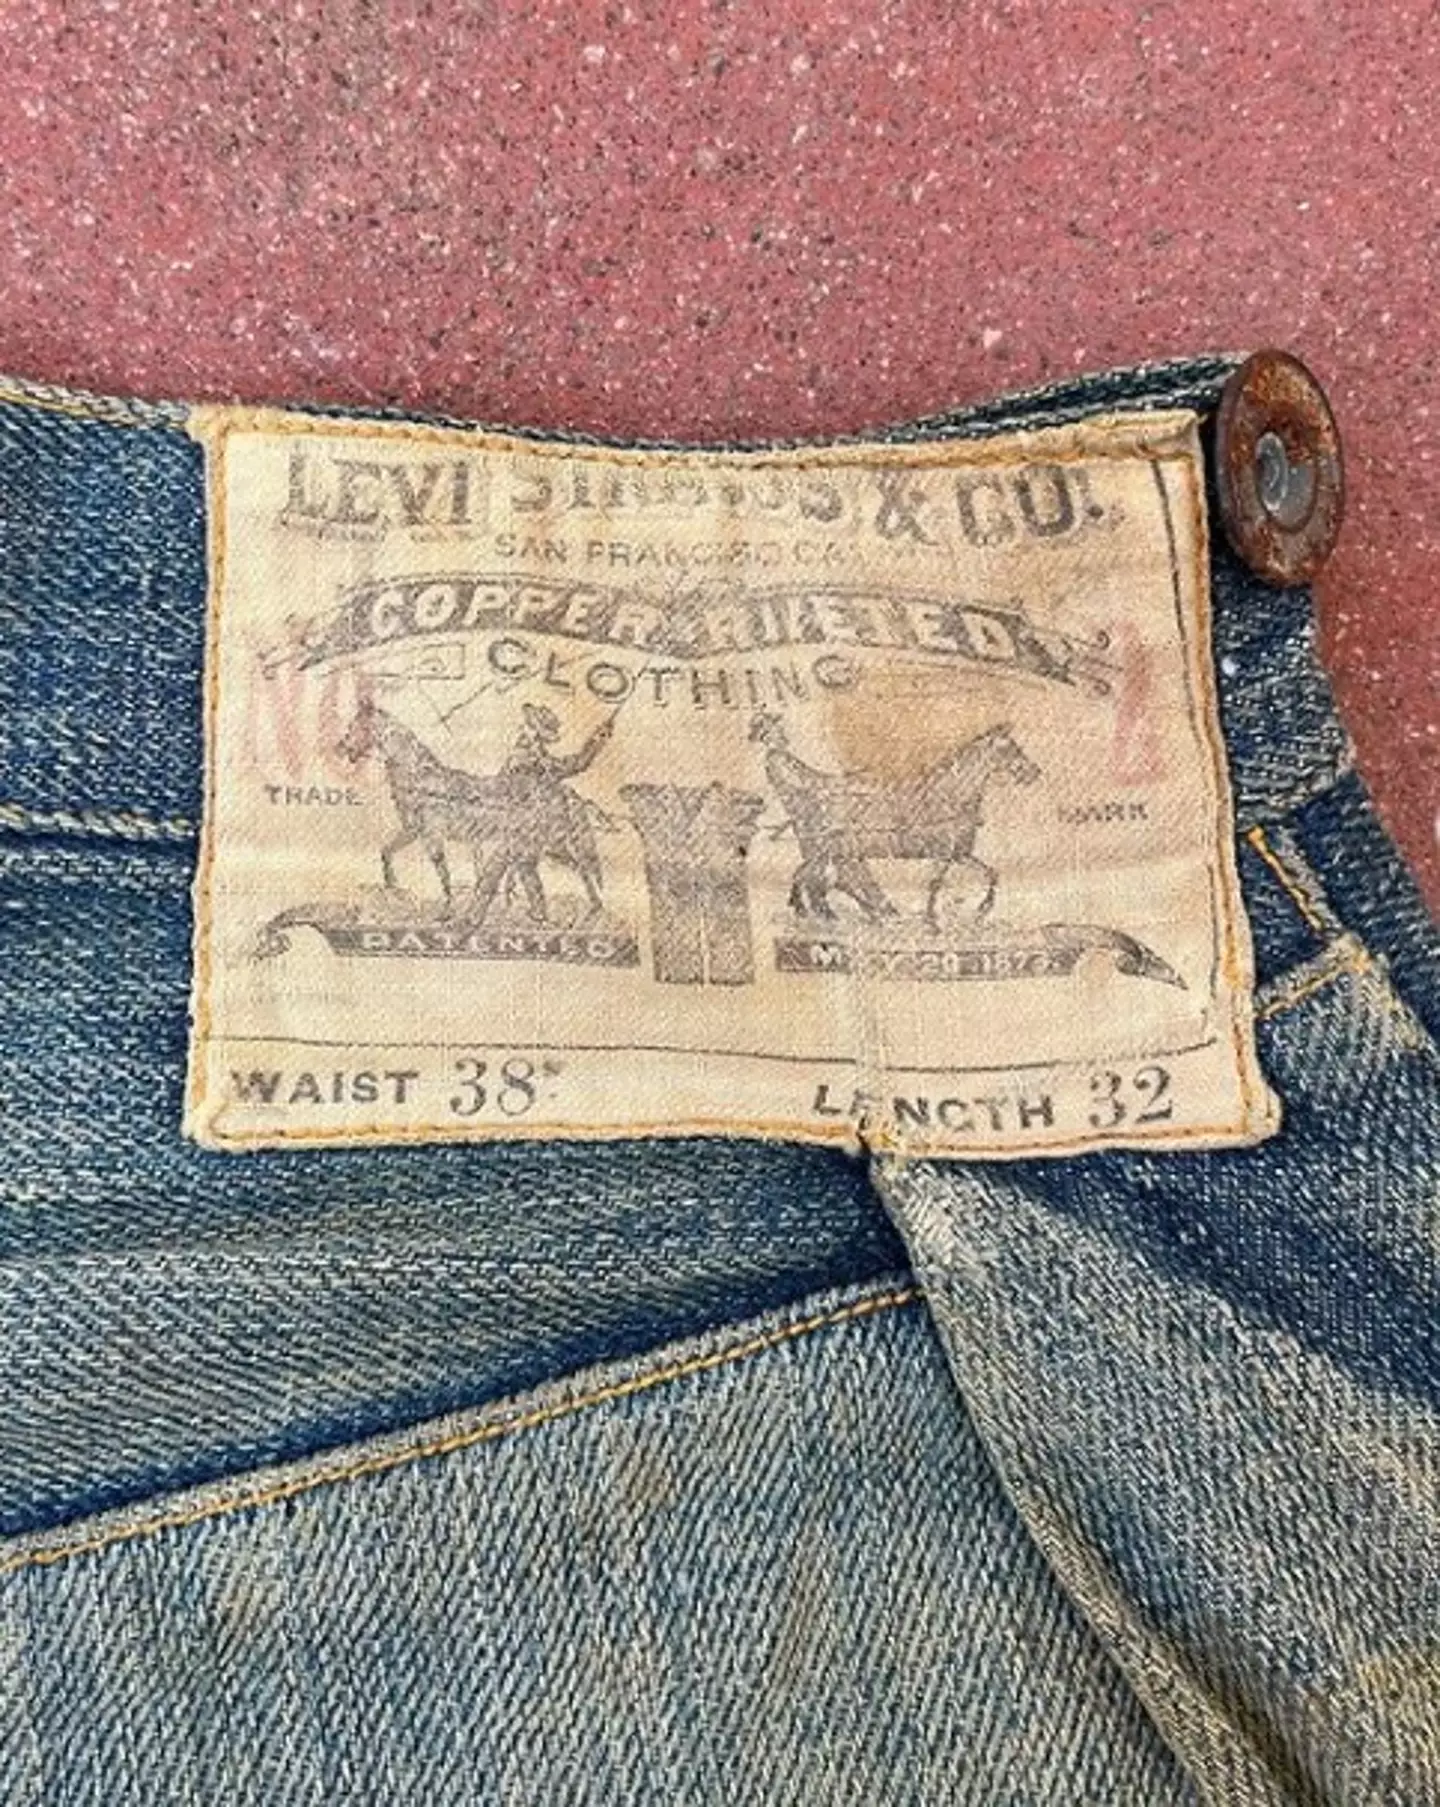 In the listing they were described as the "Holy grail of vintage denim collecting".